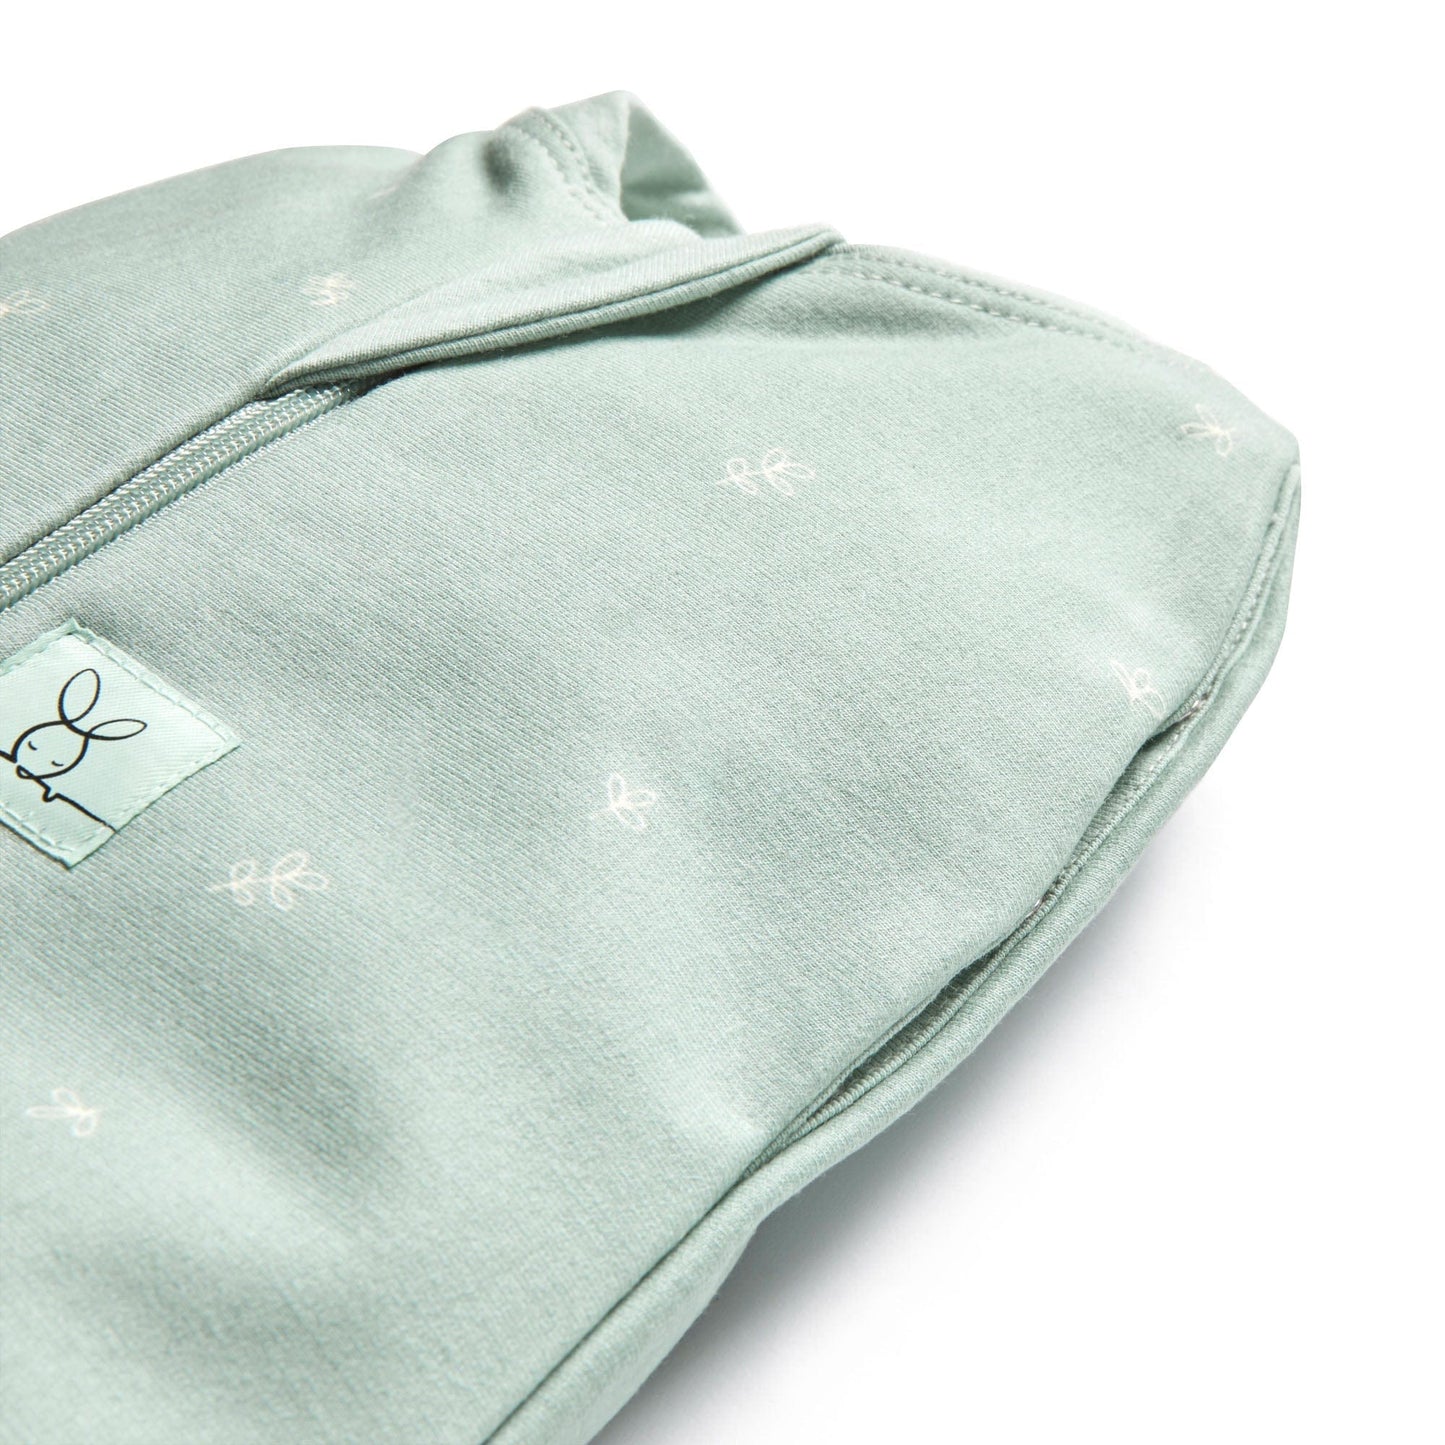 Ergopouch - Cocoon Swaddle Bag - Honey Bees - 1 Tog - Stylemykid.com